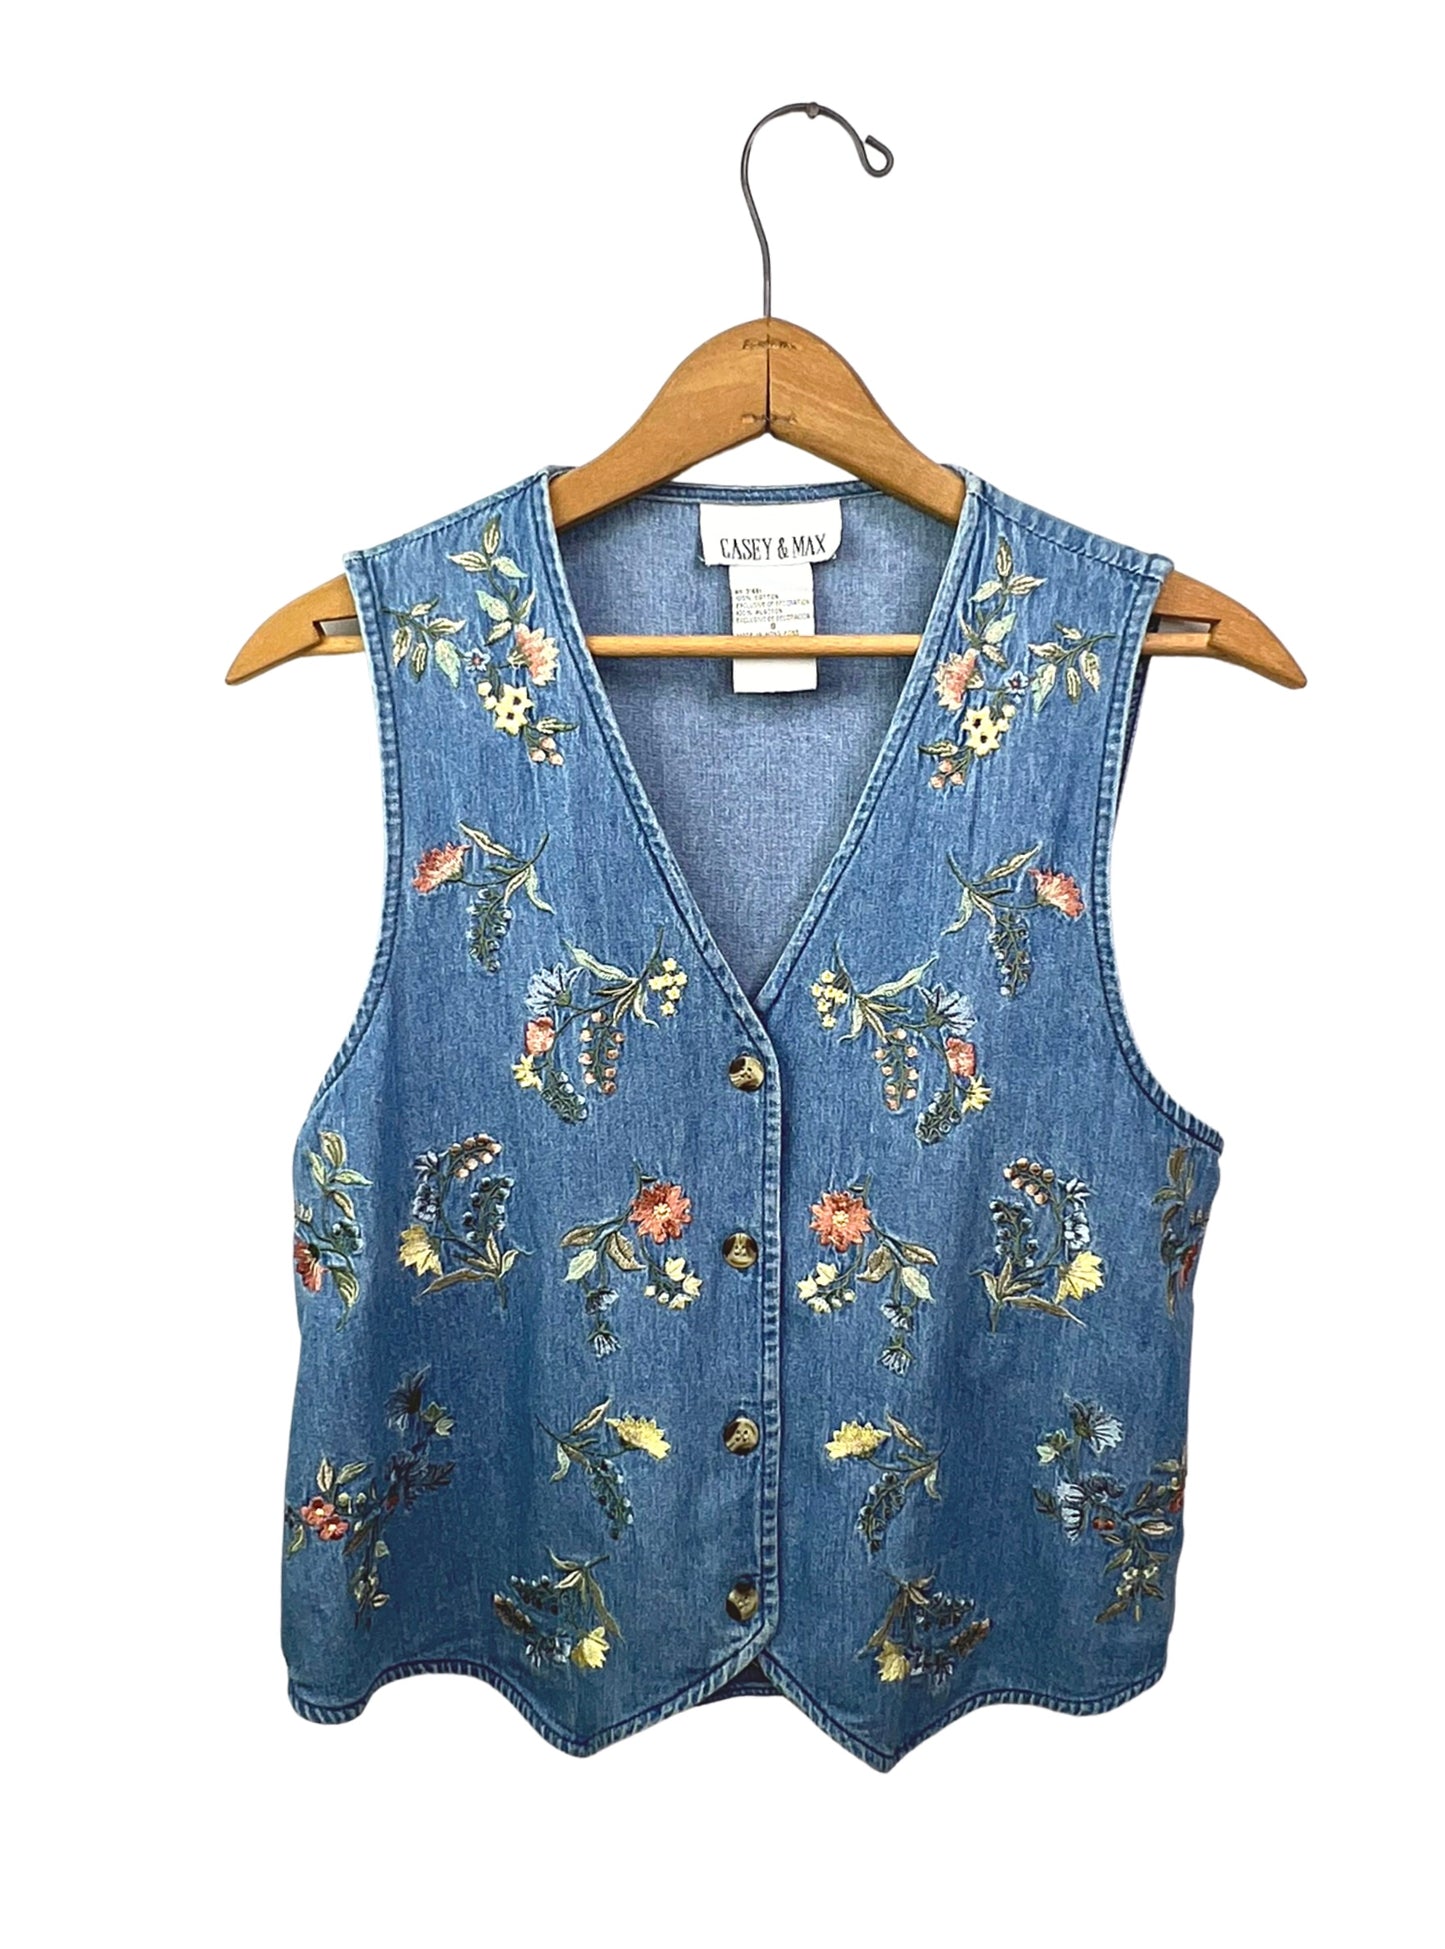 90’s Embroidered Flowers Denim Vest Wms Sz Small